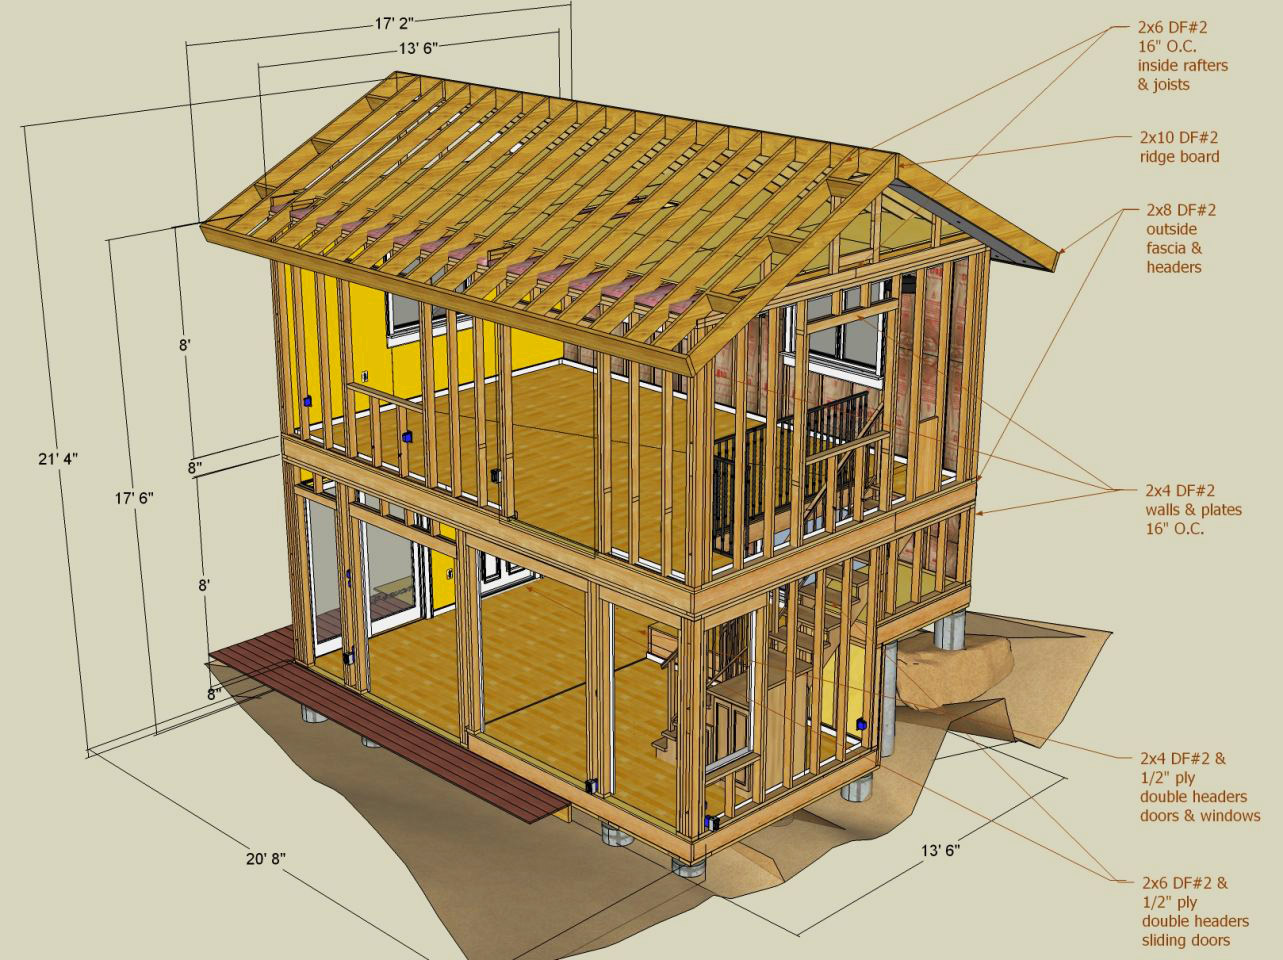 SketchUp Two Story Addition Model Framing SE Corner, With Dimensions